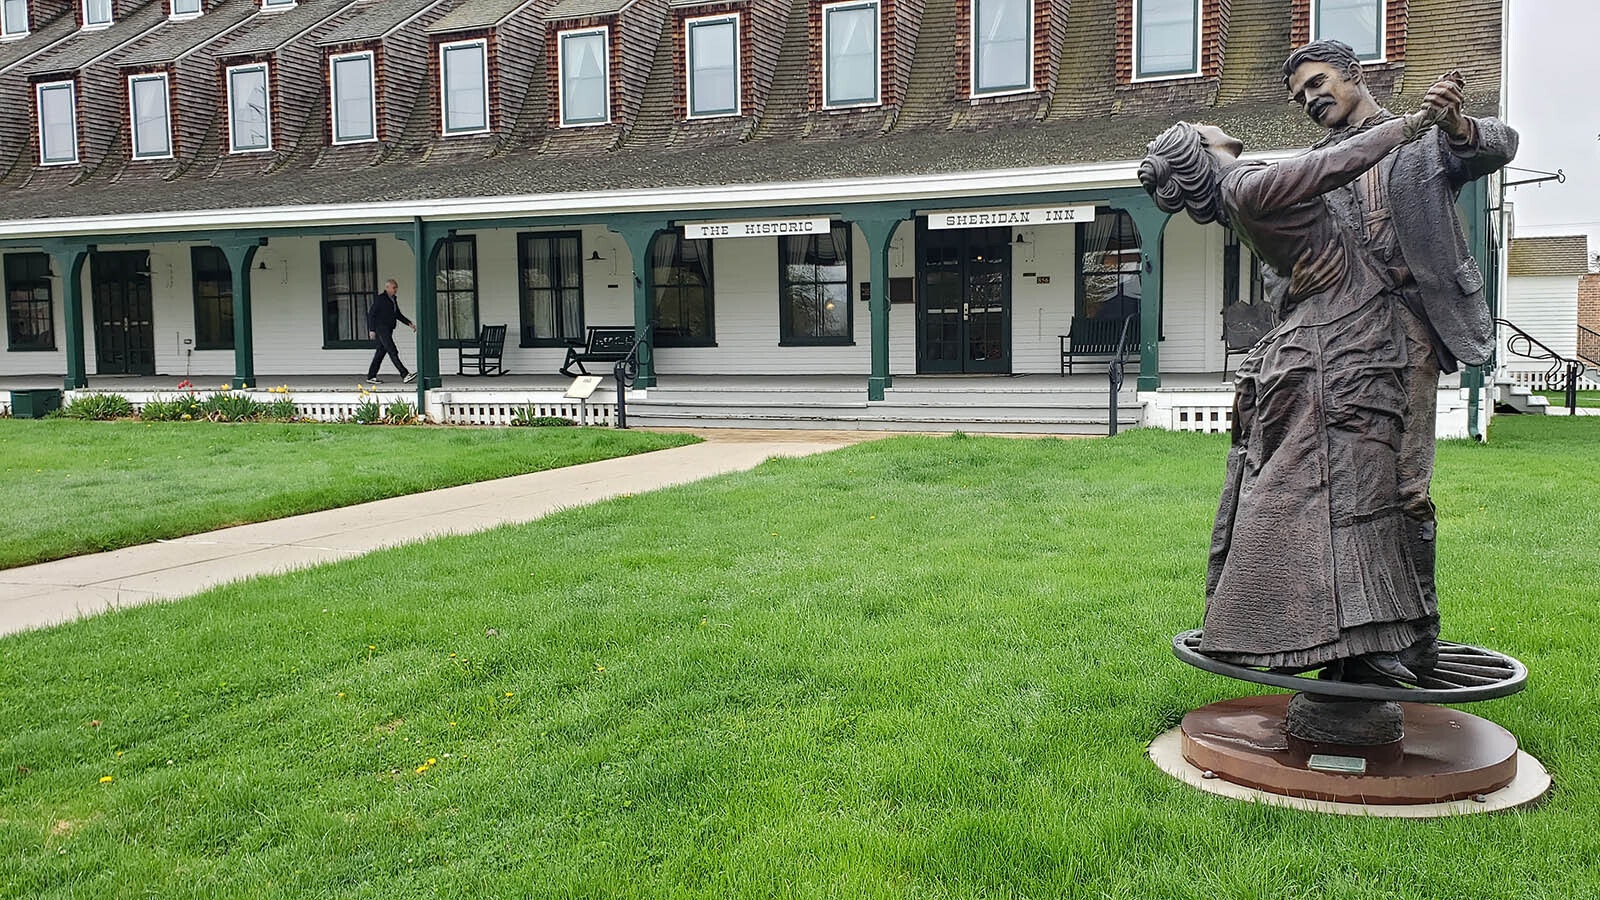 "The Dance" is a bronze sculpture on the front lawn of the Sheridan Inn that shows the high style of its historic heyday. The statue was commissioned in 2010.